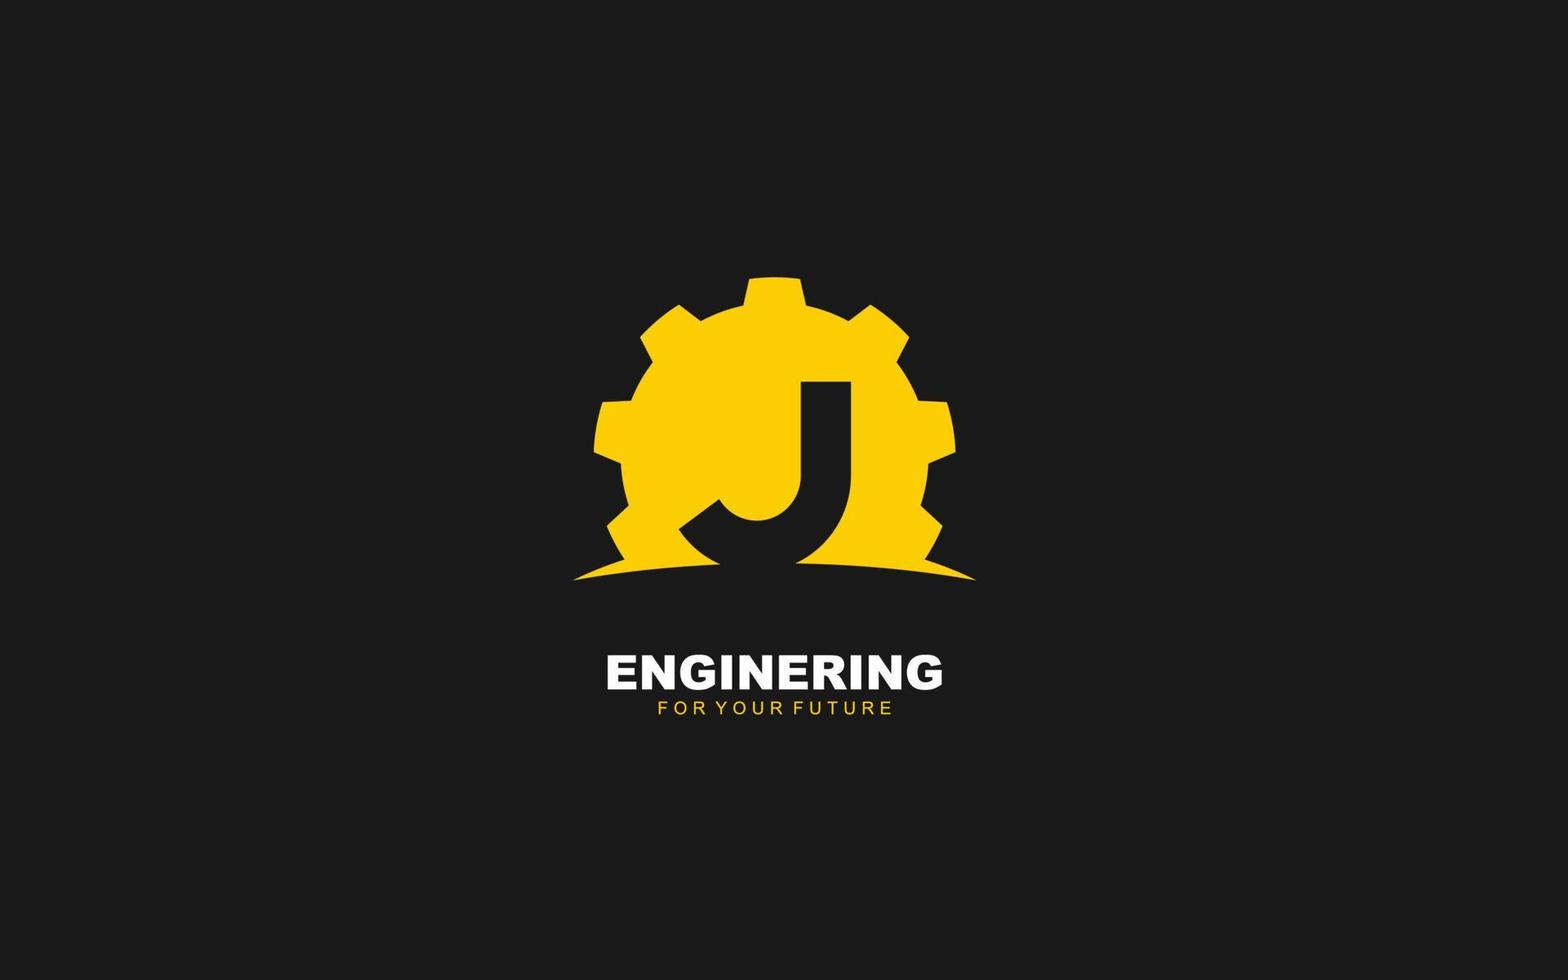 J logo gear for identity. industrial template vector illustration for your brand.